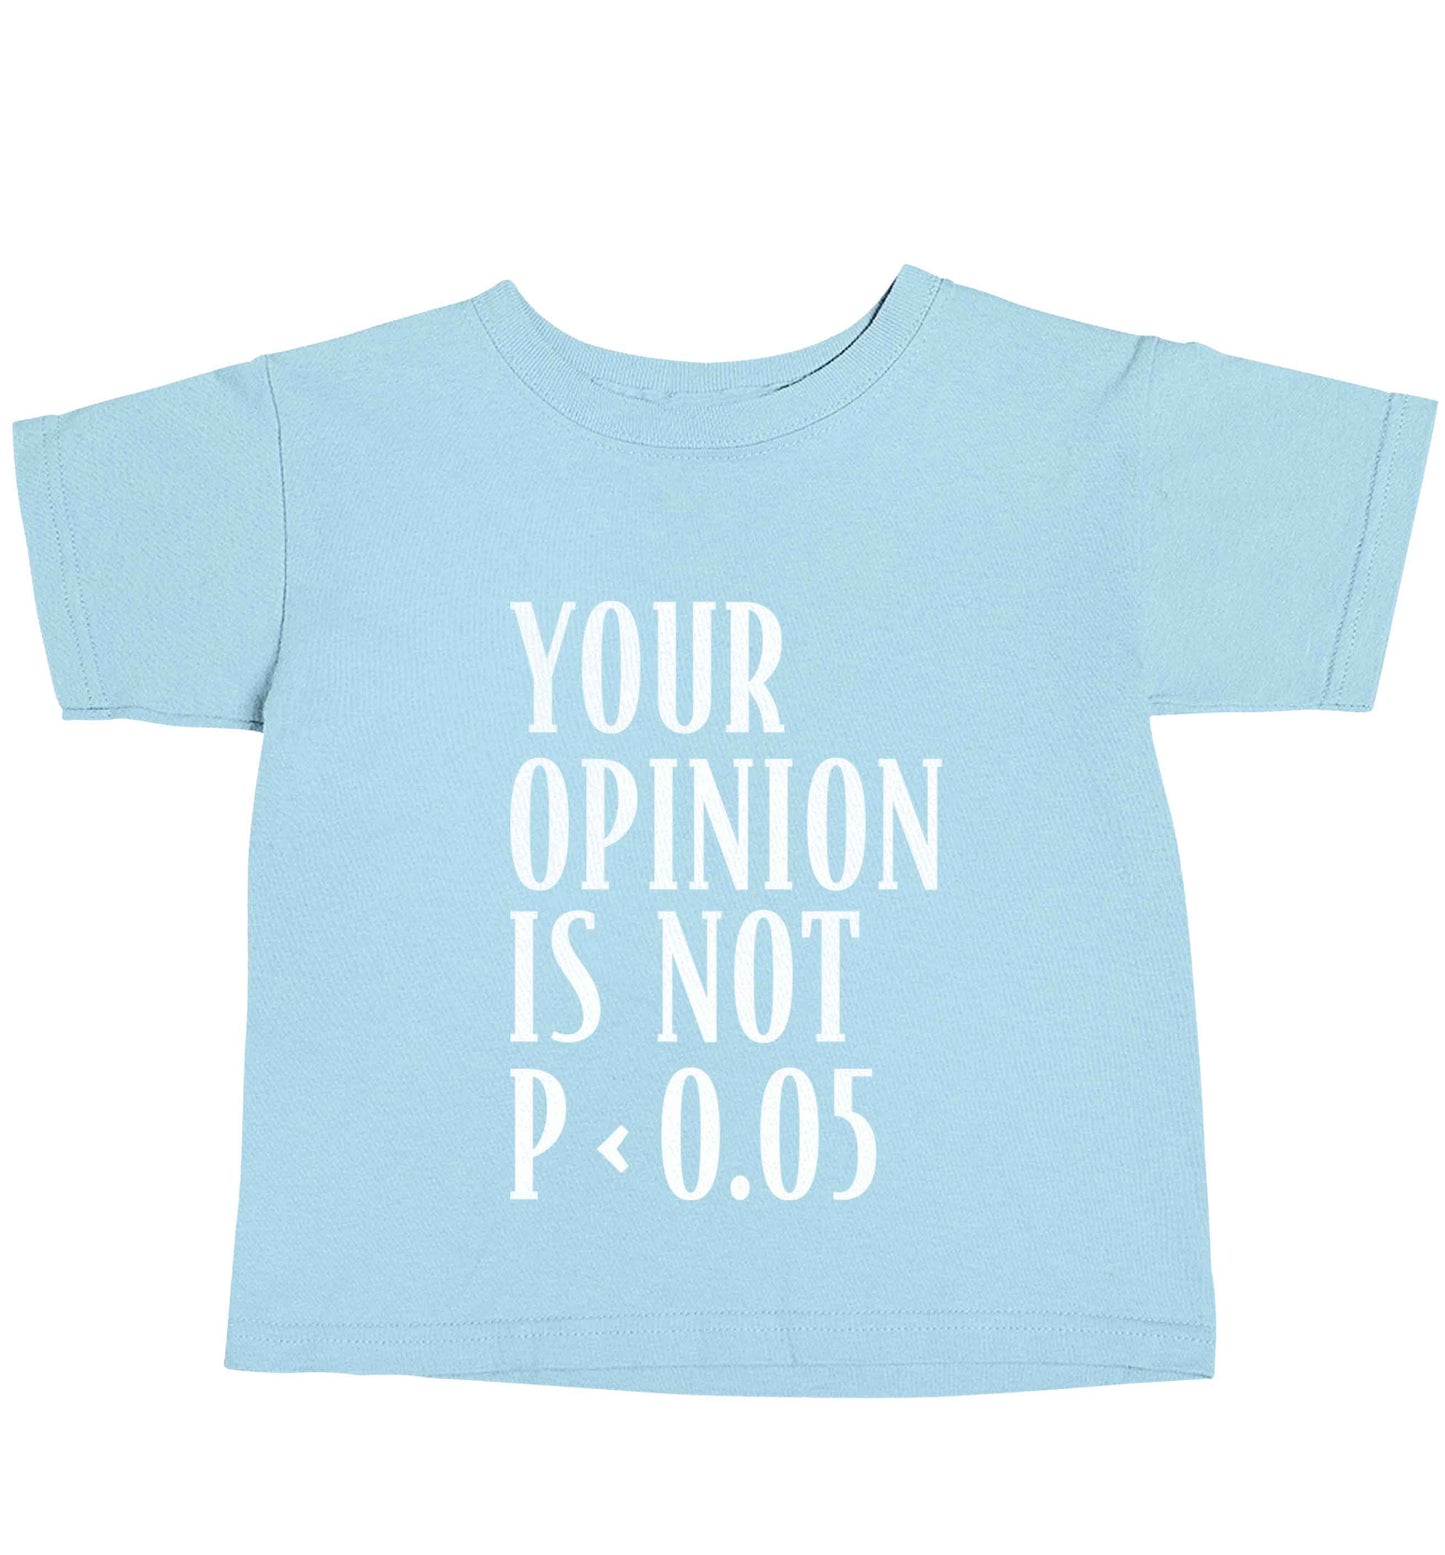 Your opinion is not P < 0.05light blue baby toddler Tshirt 2 Years